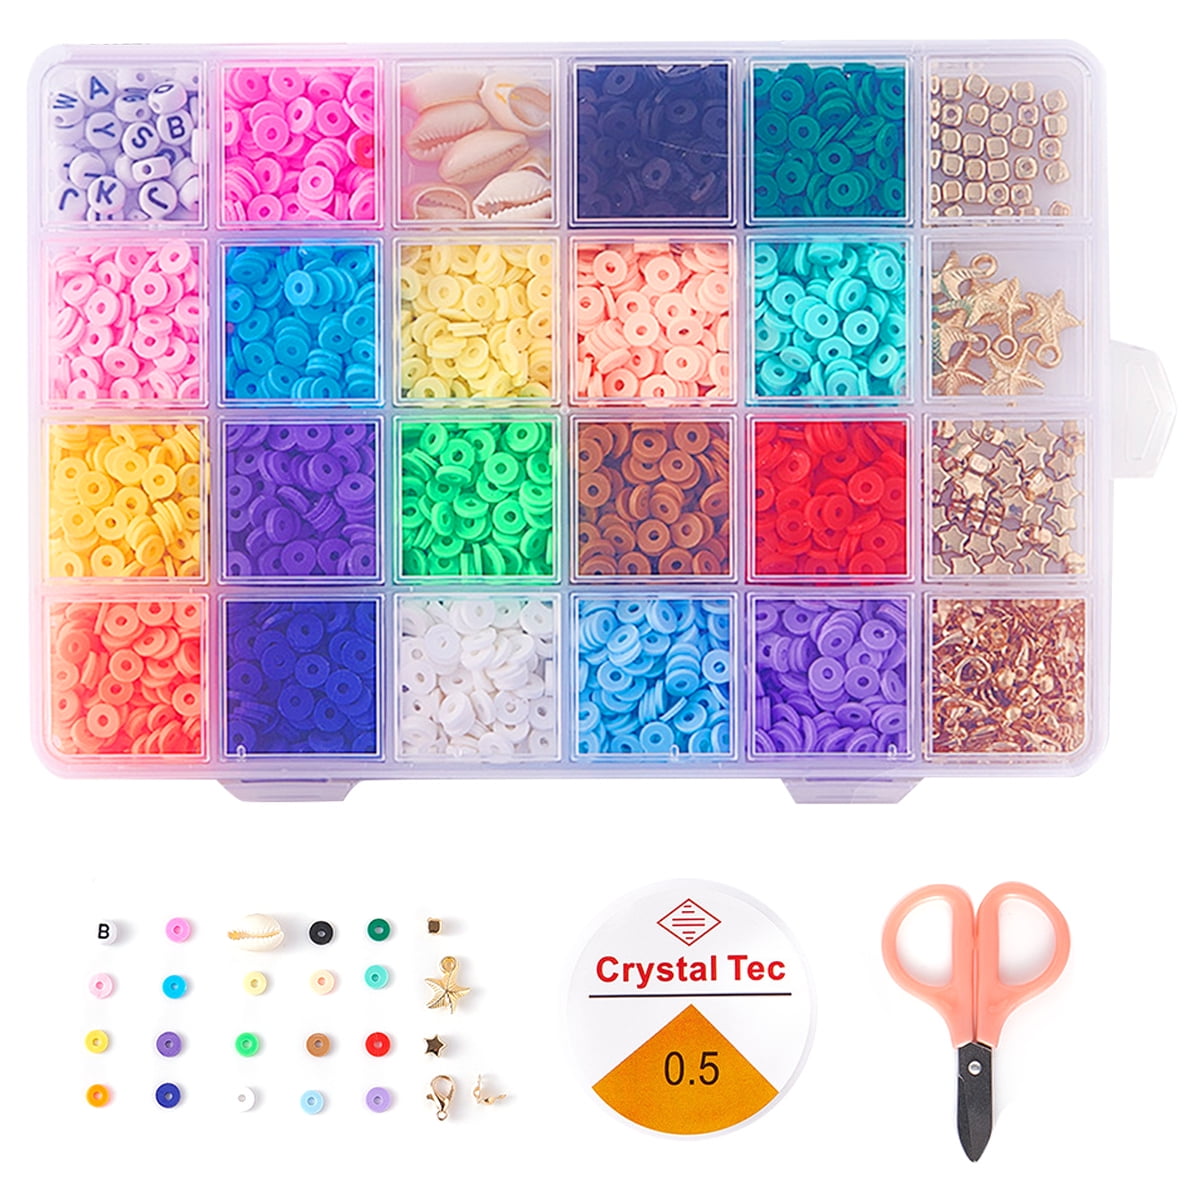 200pcs Color Snowflake Beads Spacer Gasket Beads Jewelry Making Findings  DIY Accessories Wholesale #RoLi